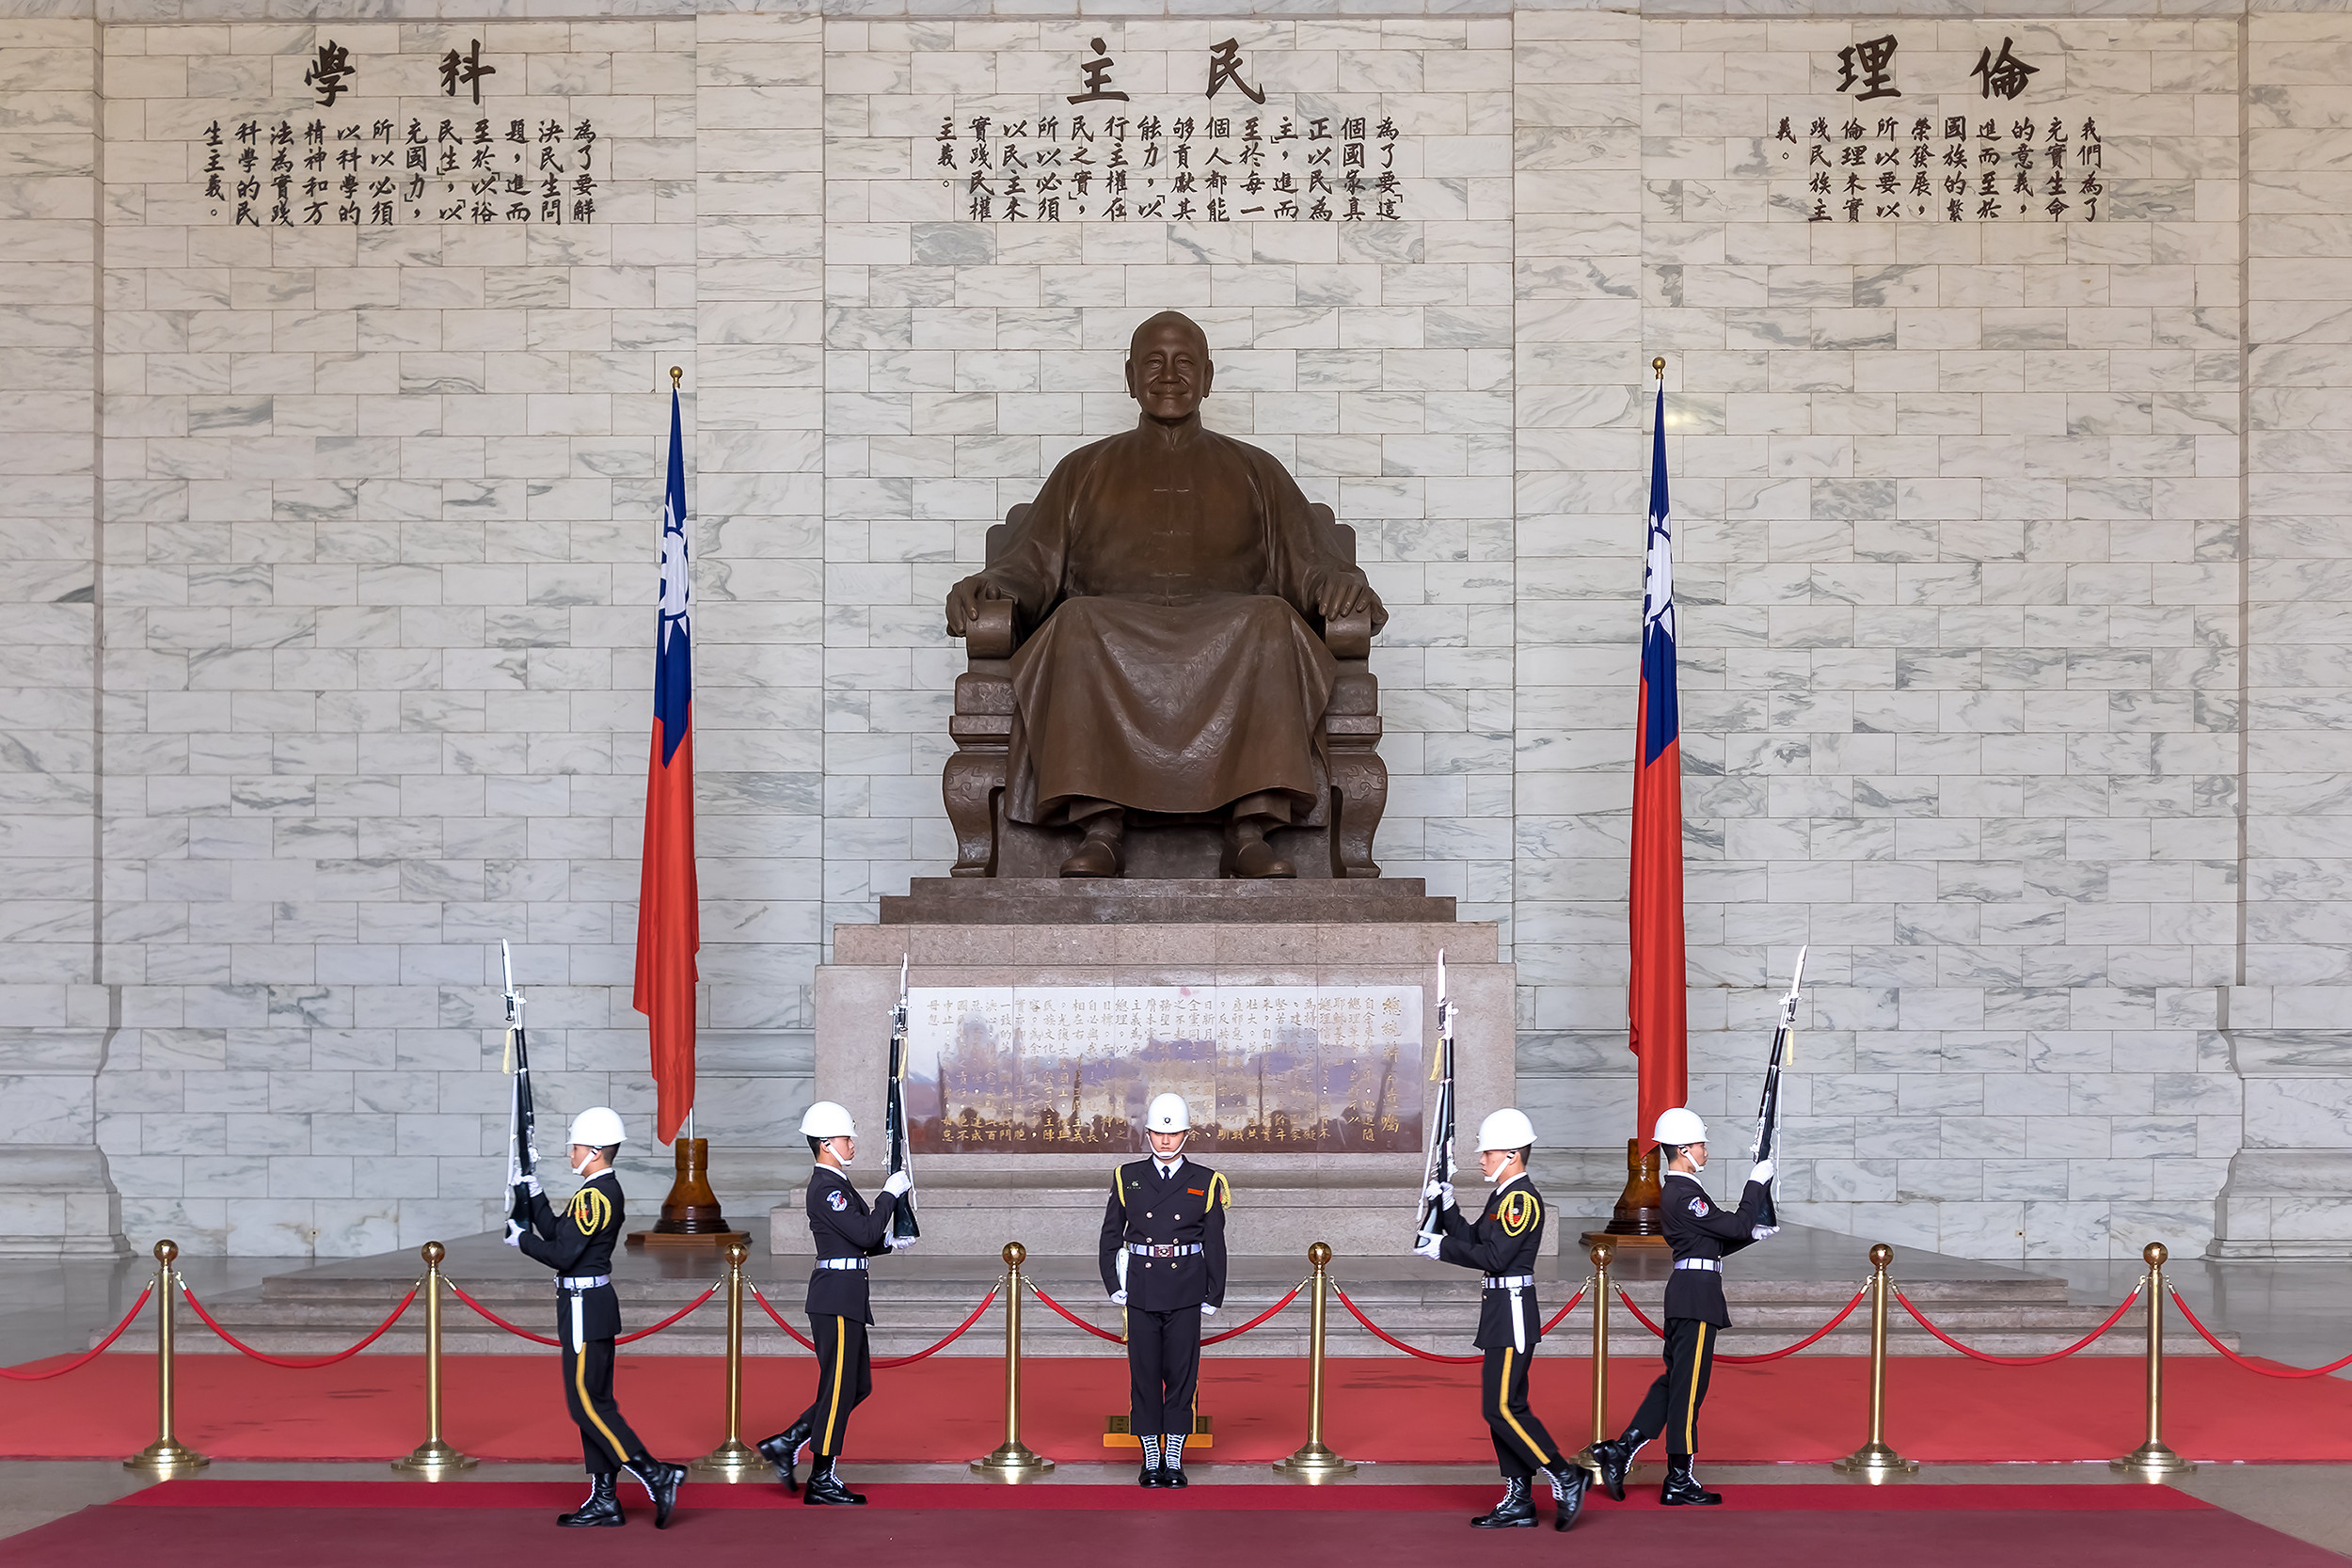 There are hundreds of statues of late president Chiang Kai-shek in public spaces across Taiwan. Photo: Shutterstock Images